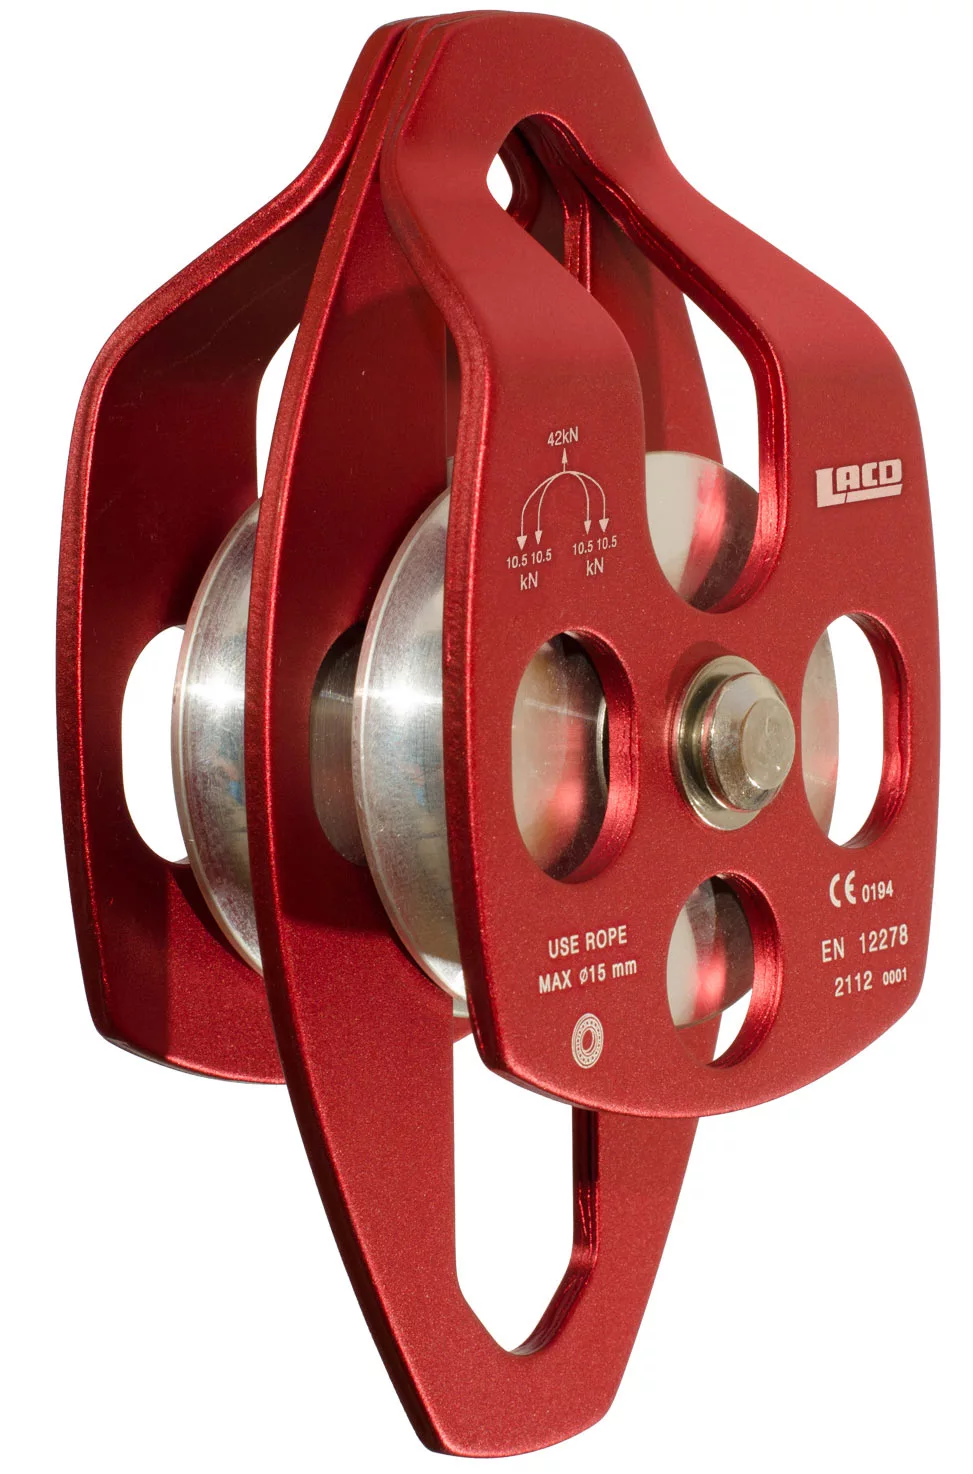 LACD Doppelseilrolle Double Pulley Mobile big